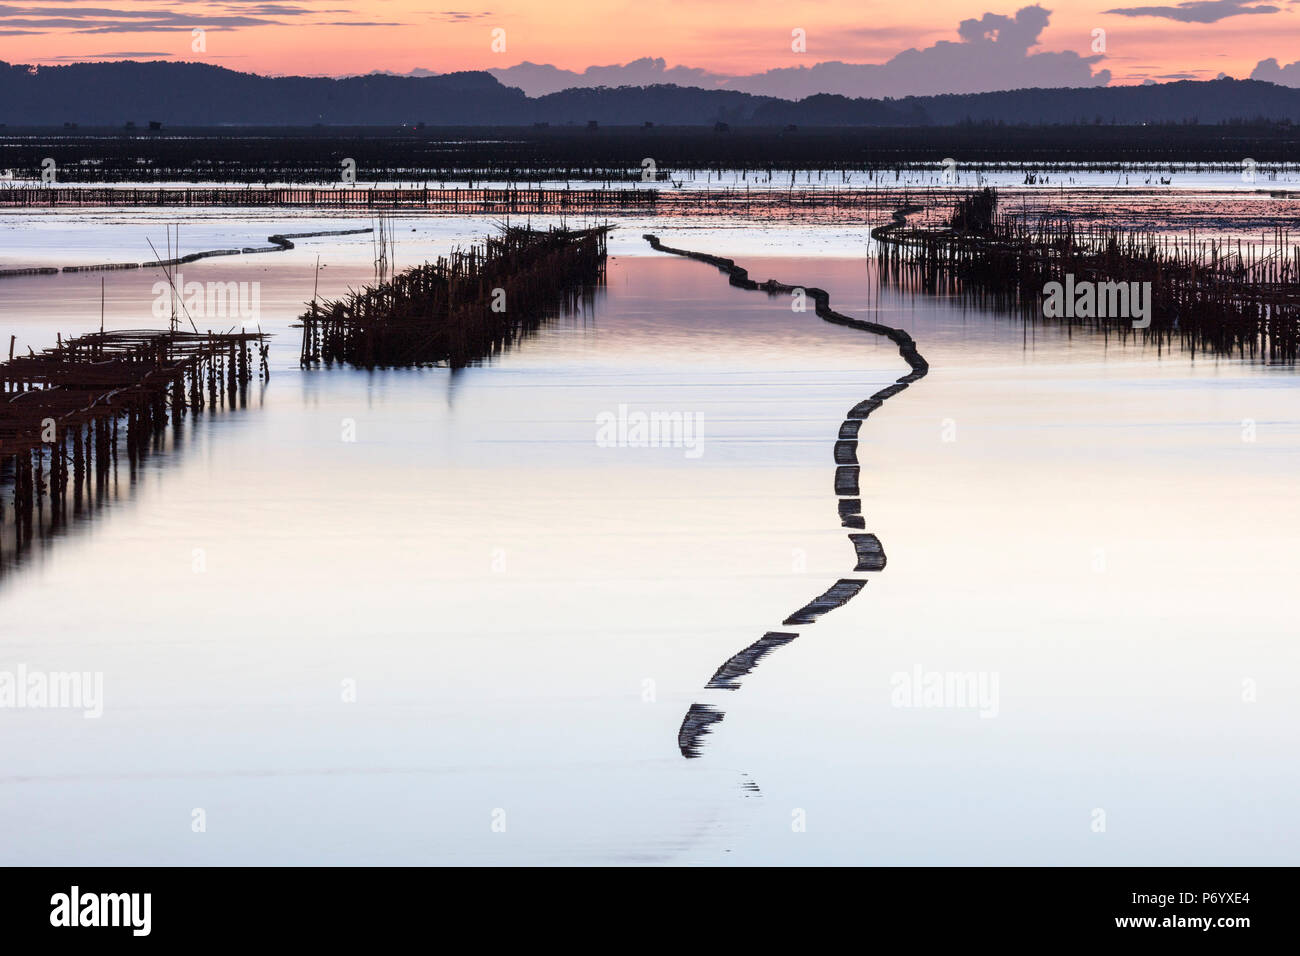 Oyster beds in the shape of a snake at sunset, Halong Bay, Quang Ninh Province, North-East Vietnam, South-East Asia Stock Photo